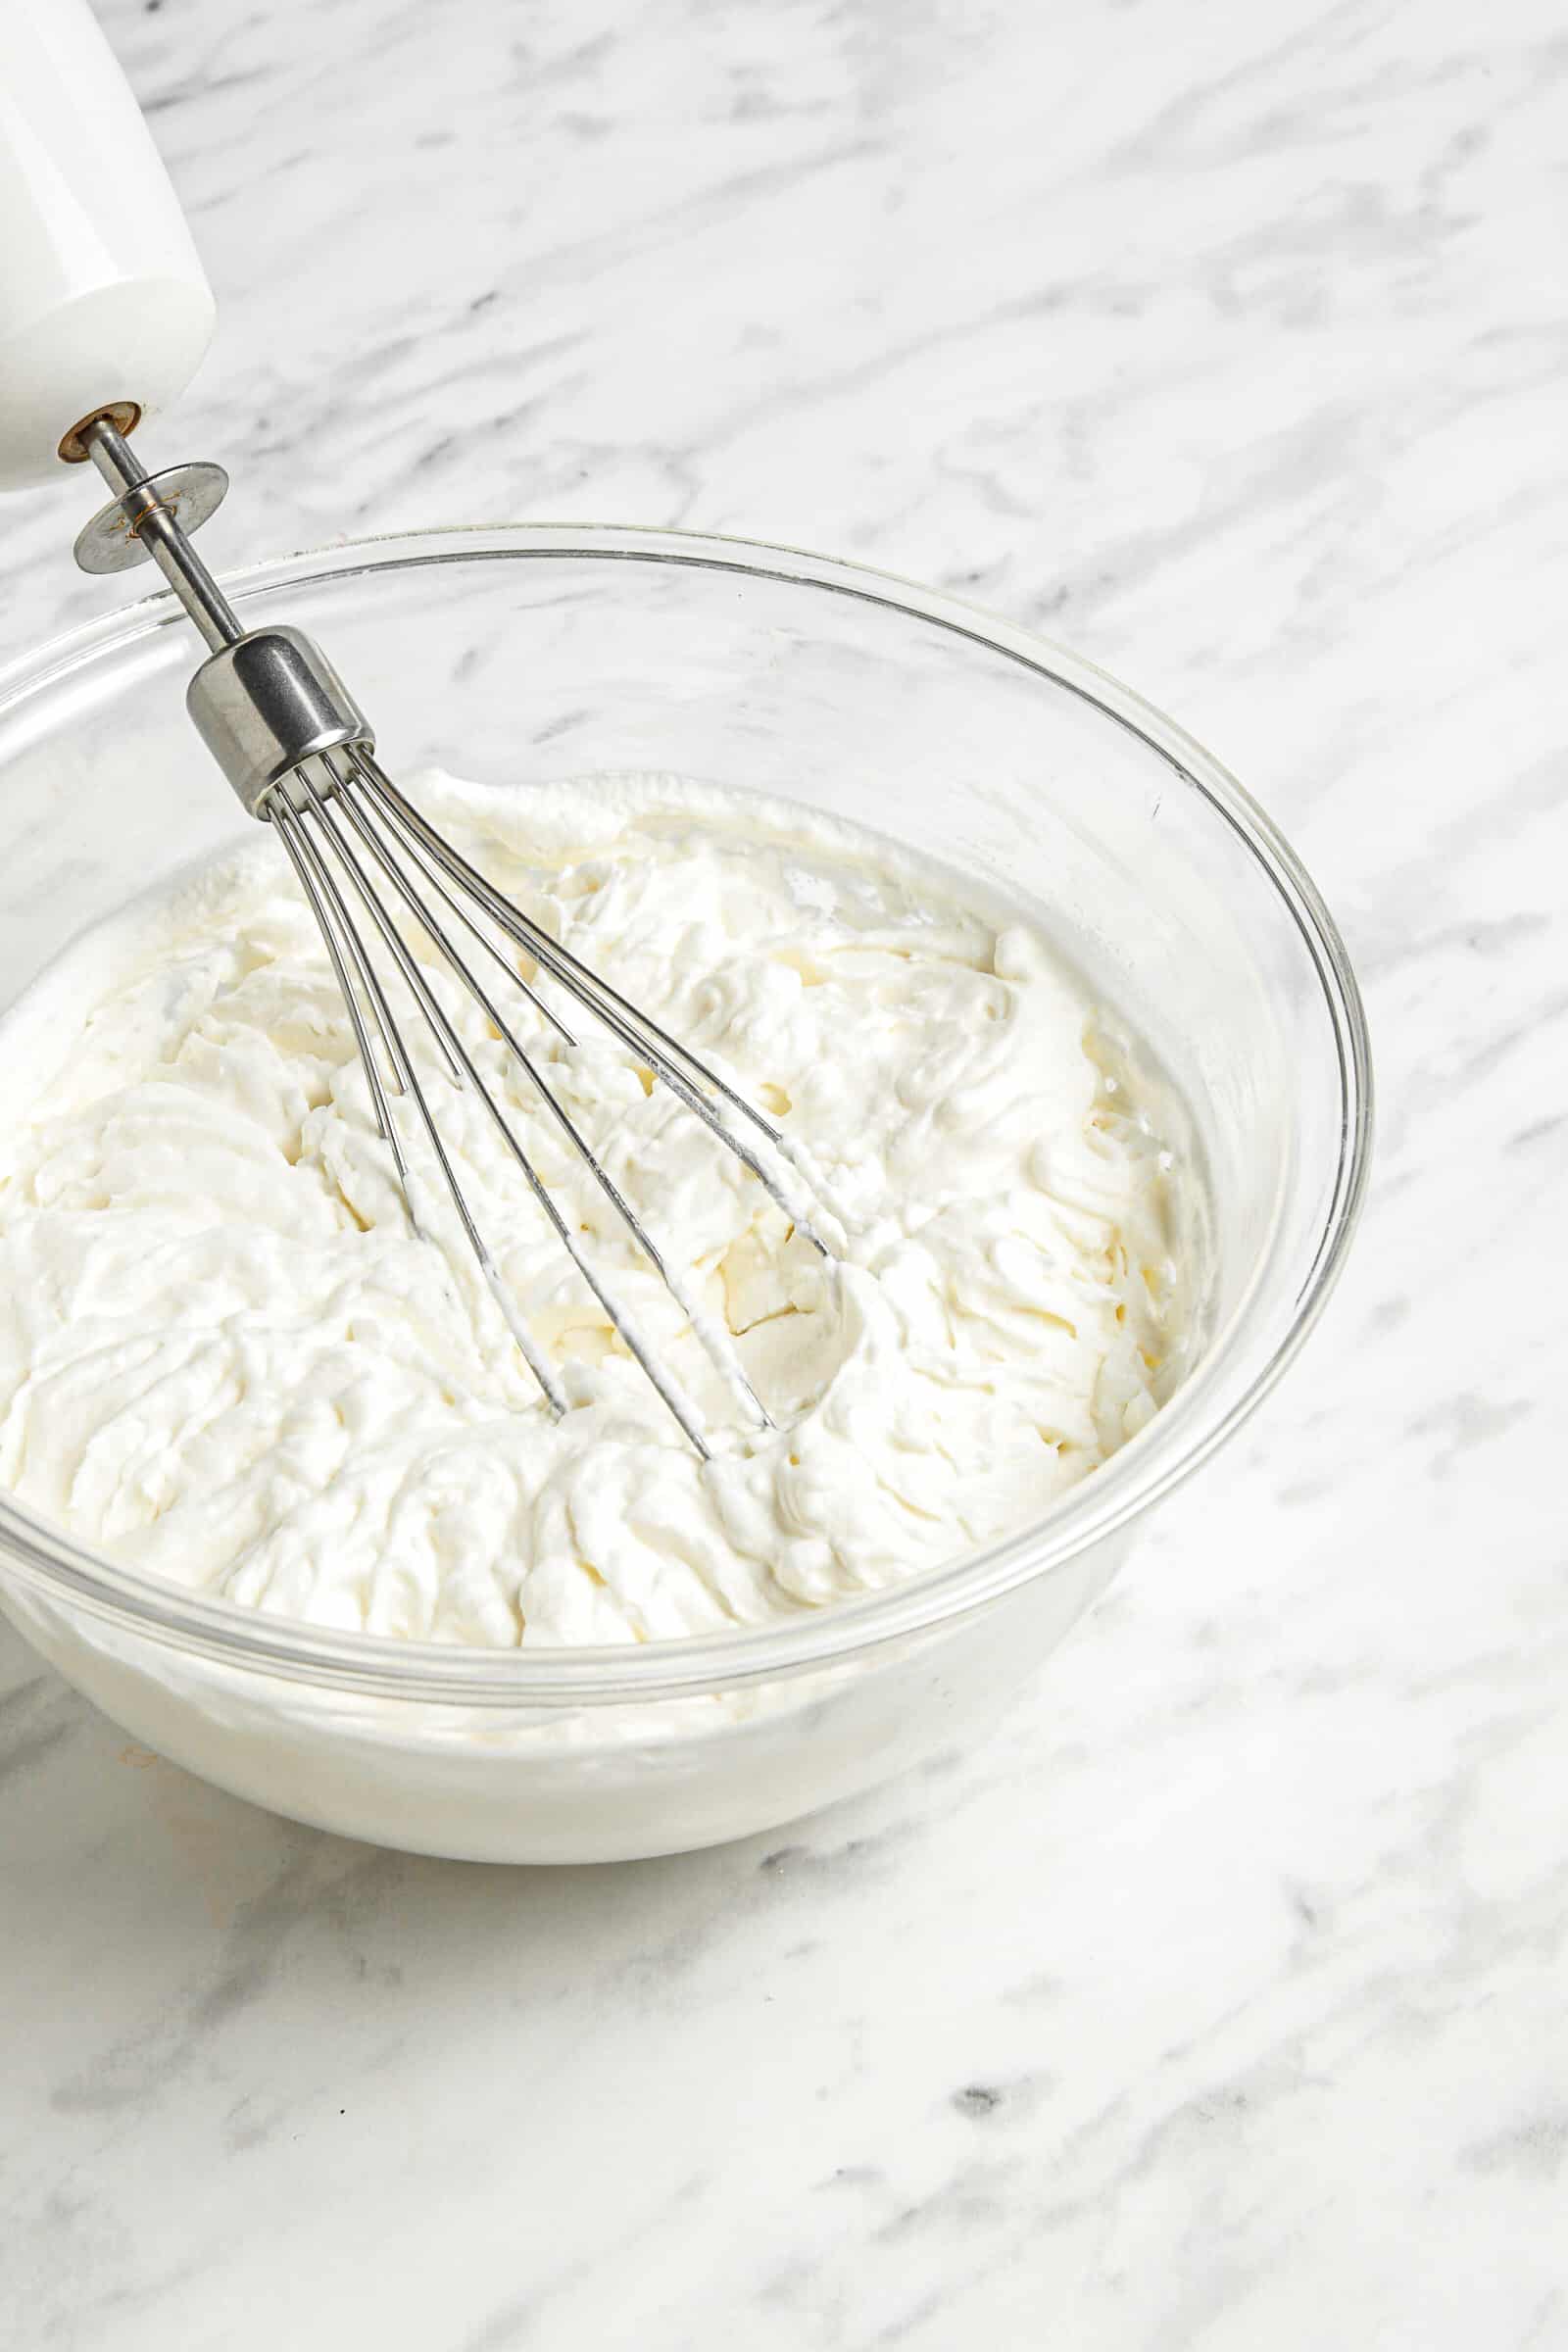 whipped cream in a bowl with an electric whisk